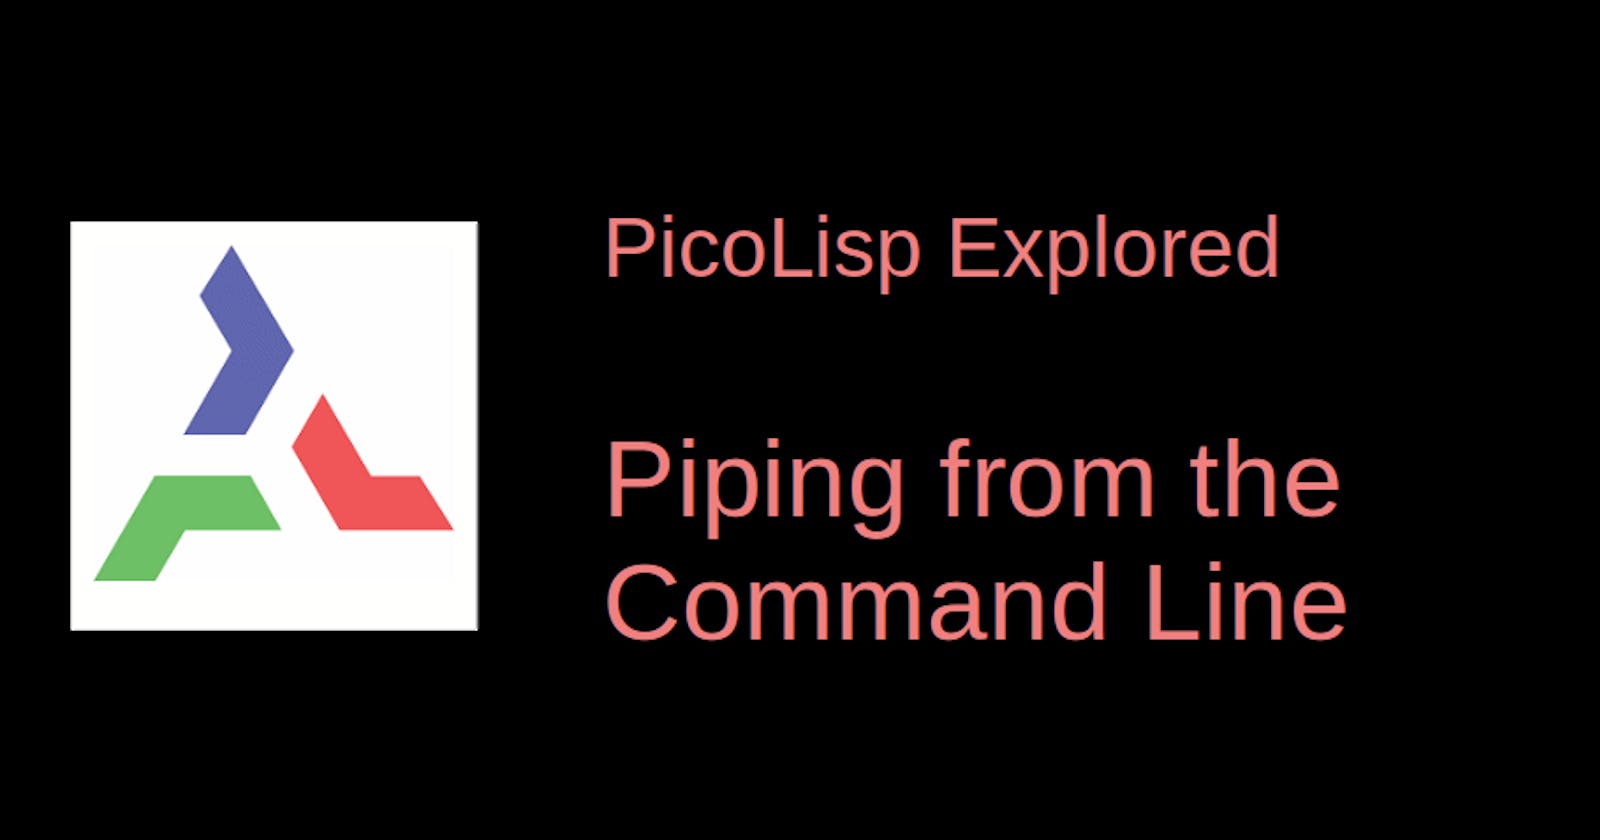 PicoLisp Explored: Piping from the Command Line